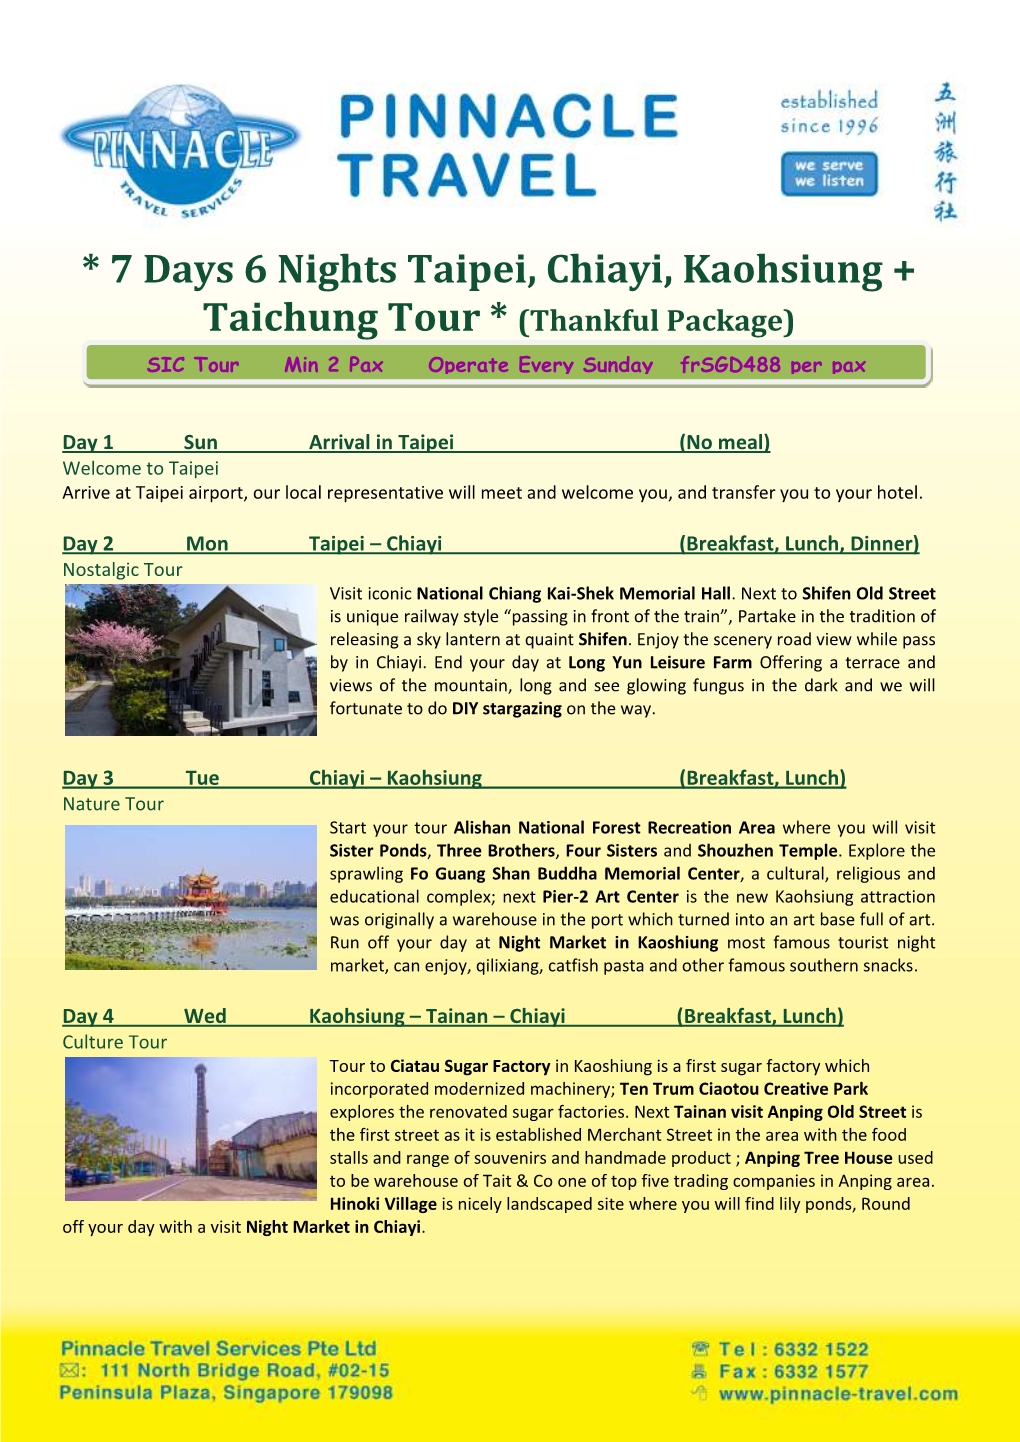 * 7 Days 6 Nights Taipei, Chiayi, Kaohsiung + Taichung Tour * (Thankful Package) SIC Tour Min 2 Pax Operate Every Sunday Frsgd488 Per Pax